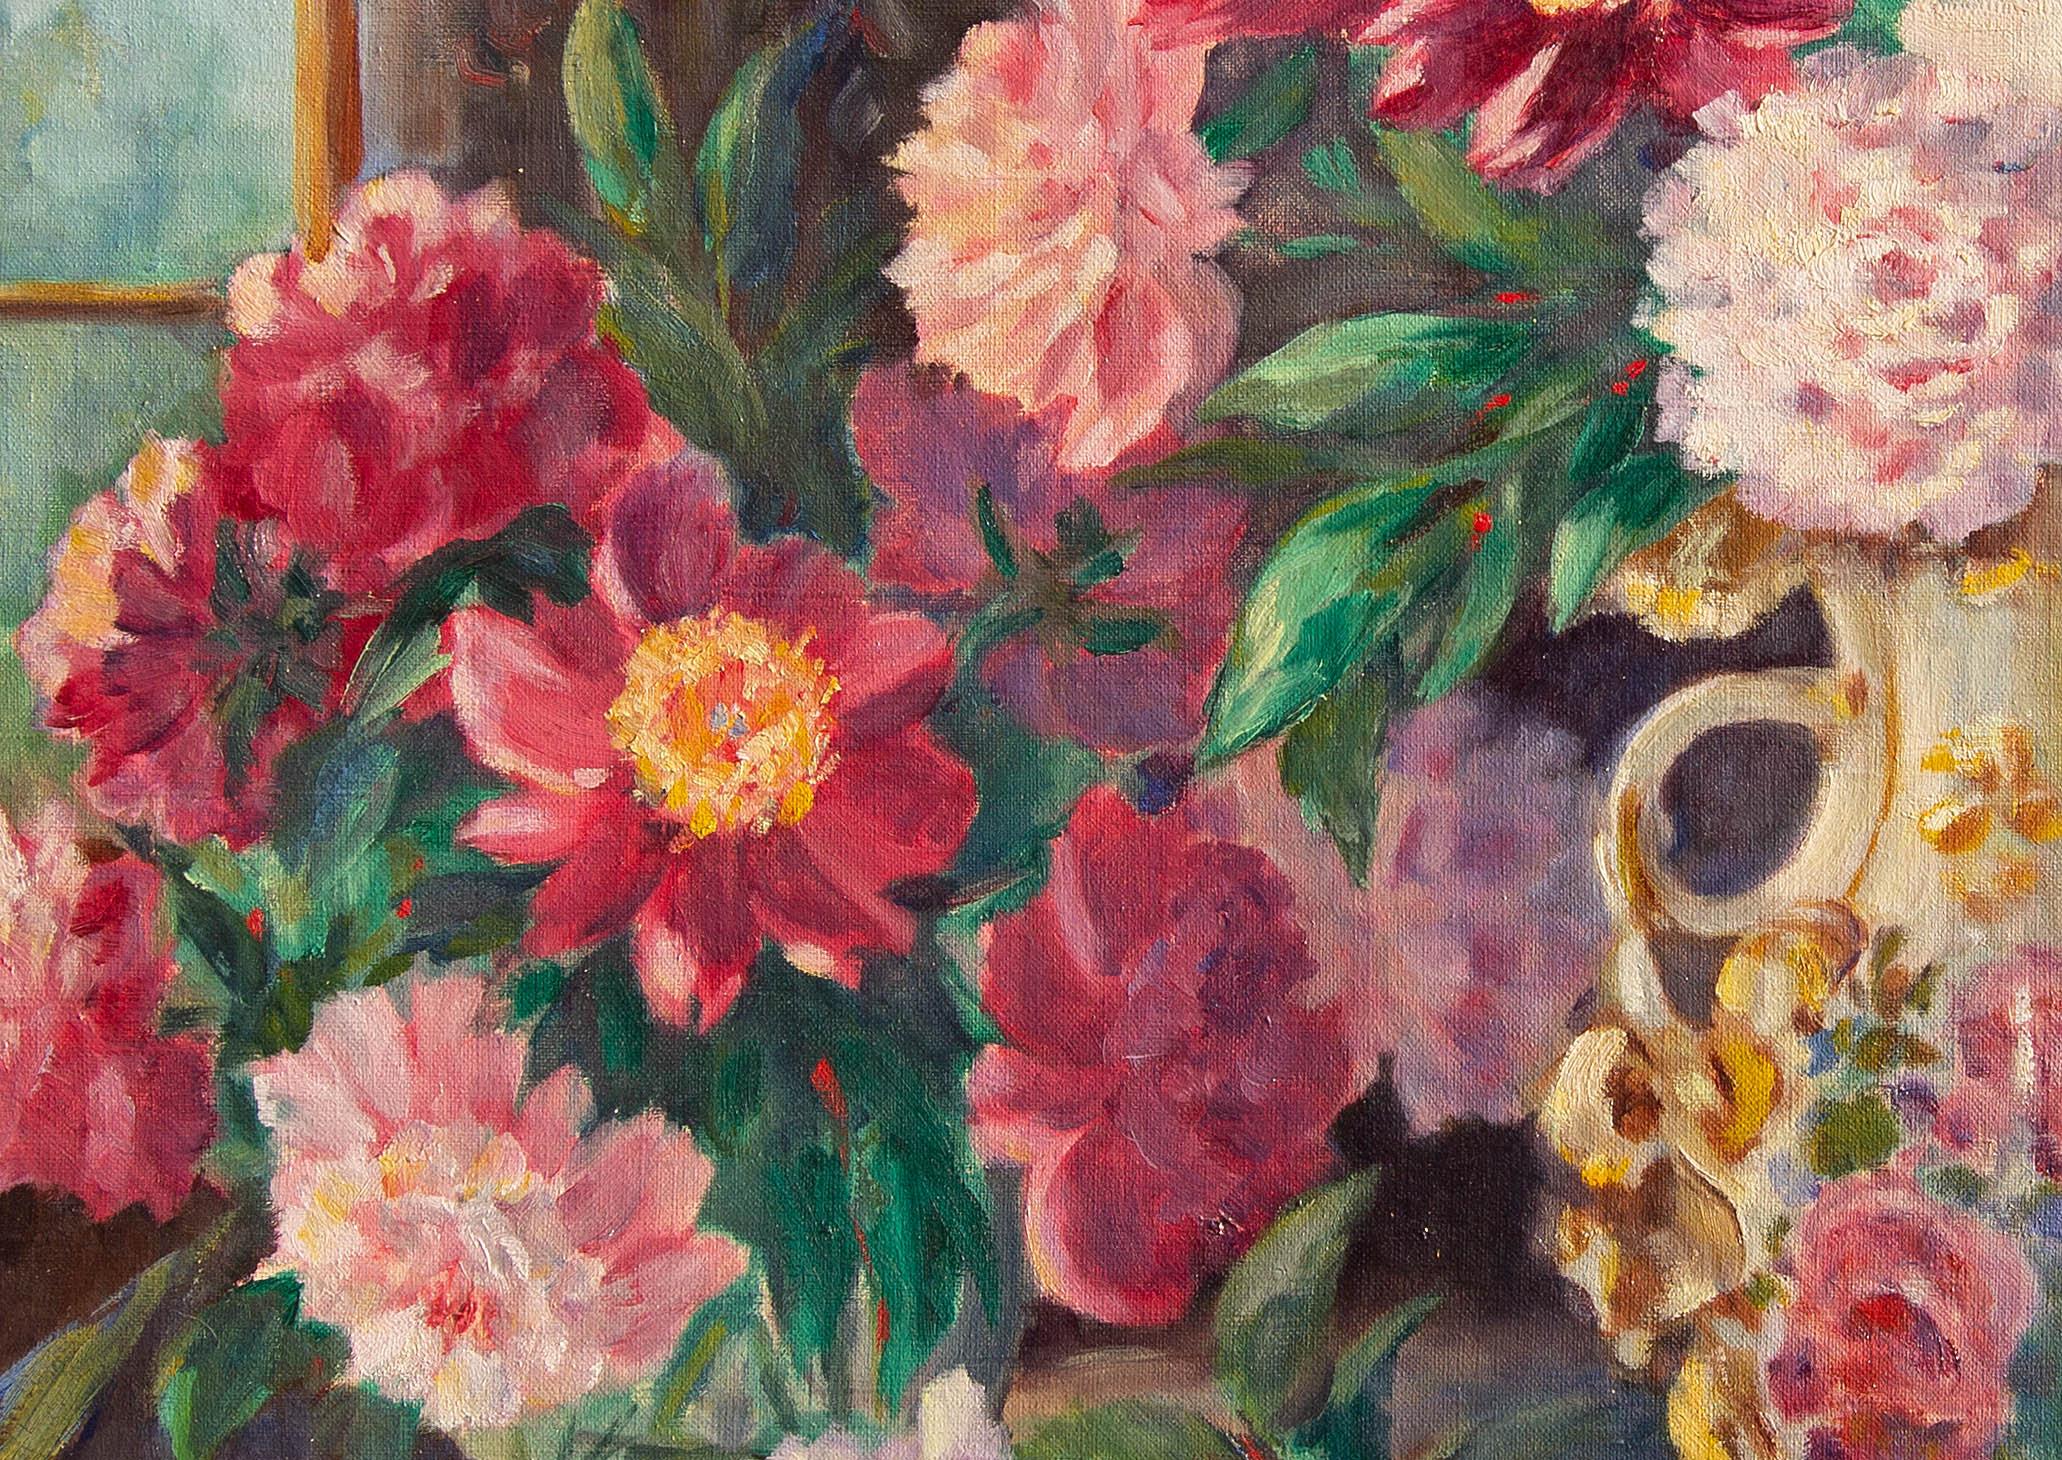 Early 20th century floral still life painting. Vibrant colors. Oil on canvas. Illegibly signed. Unframed.